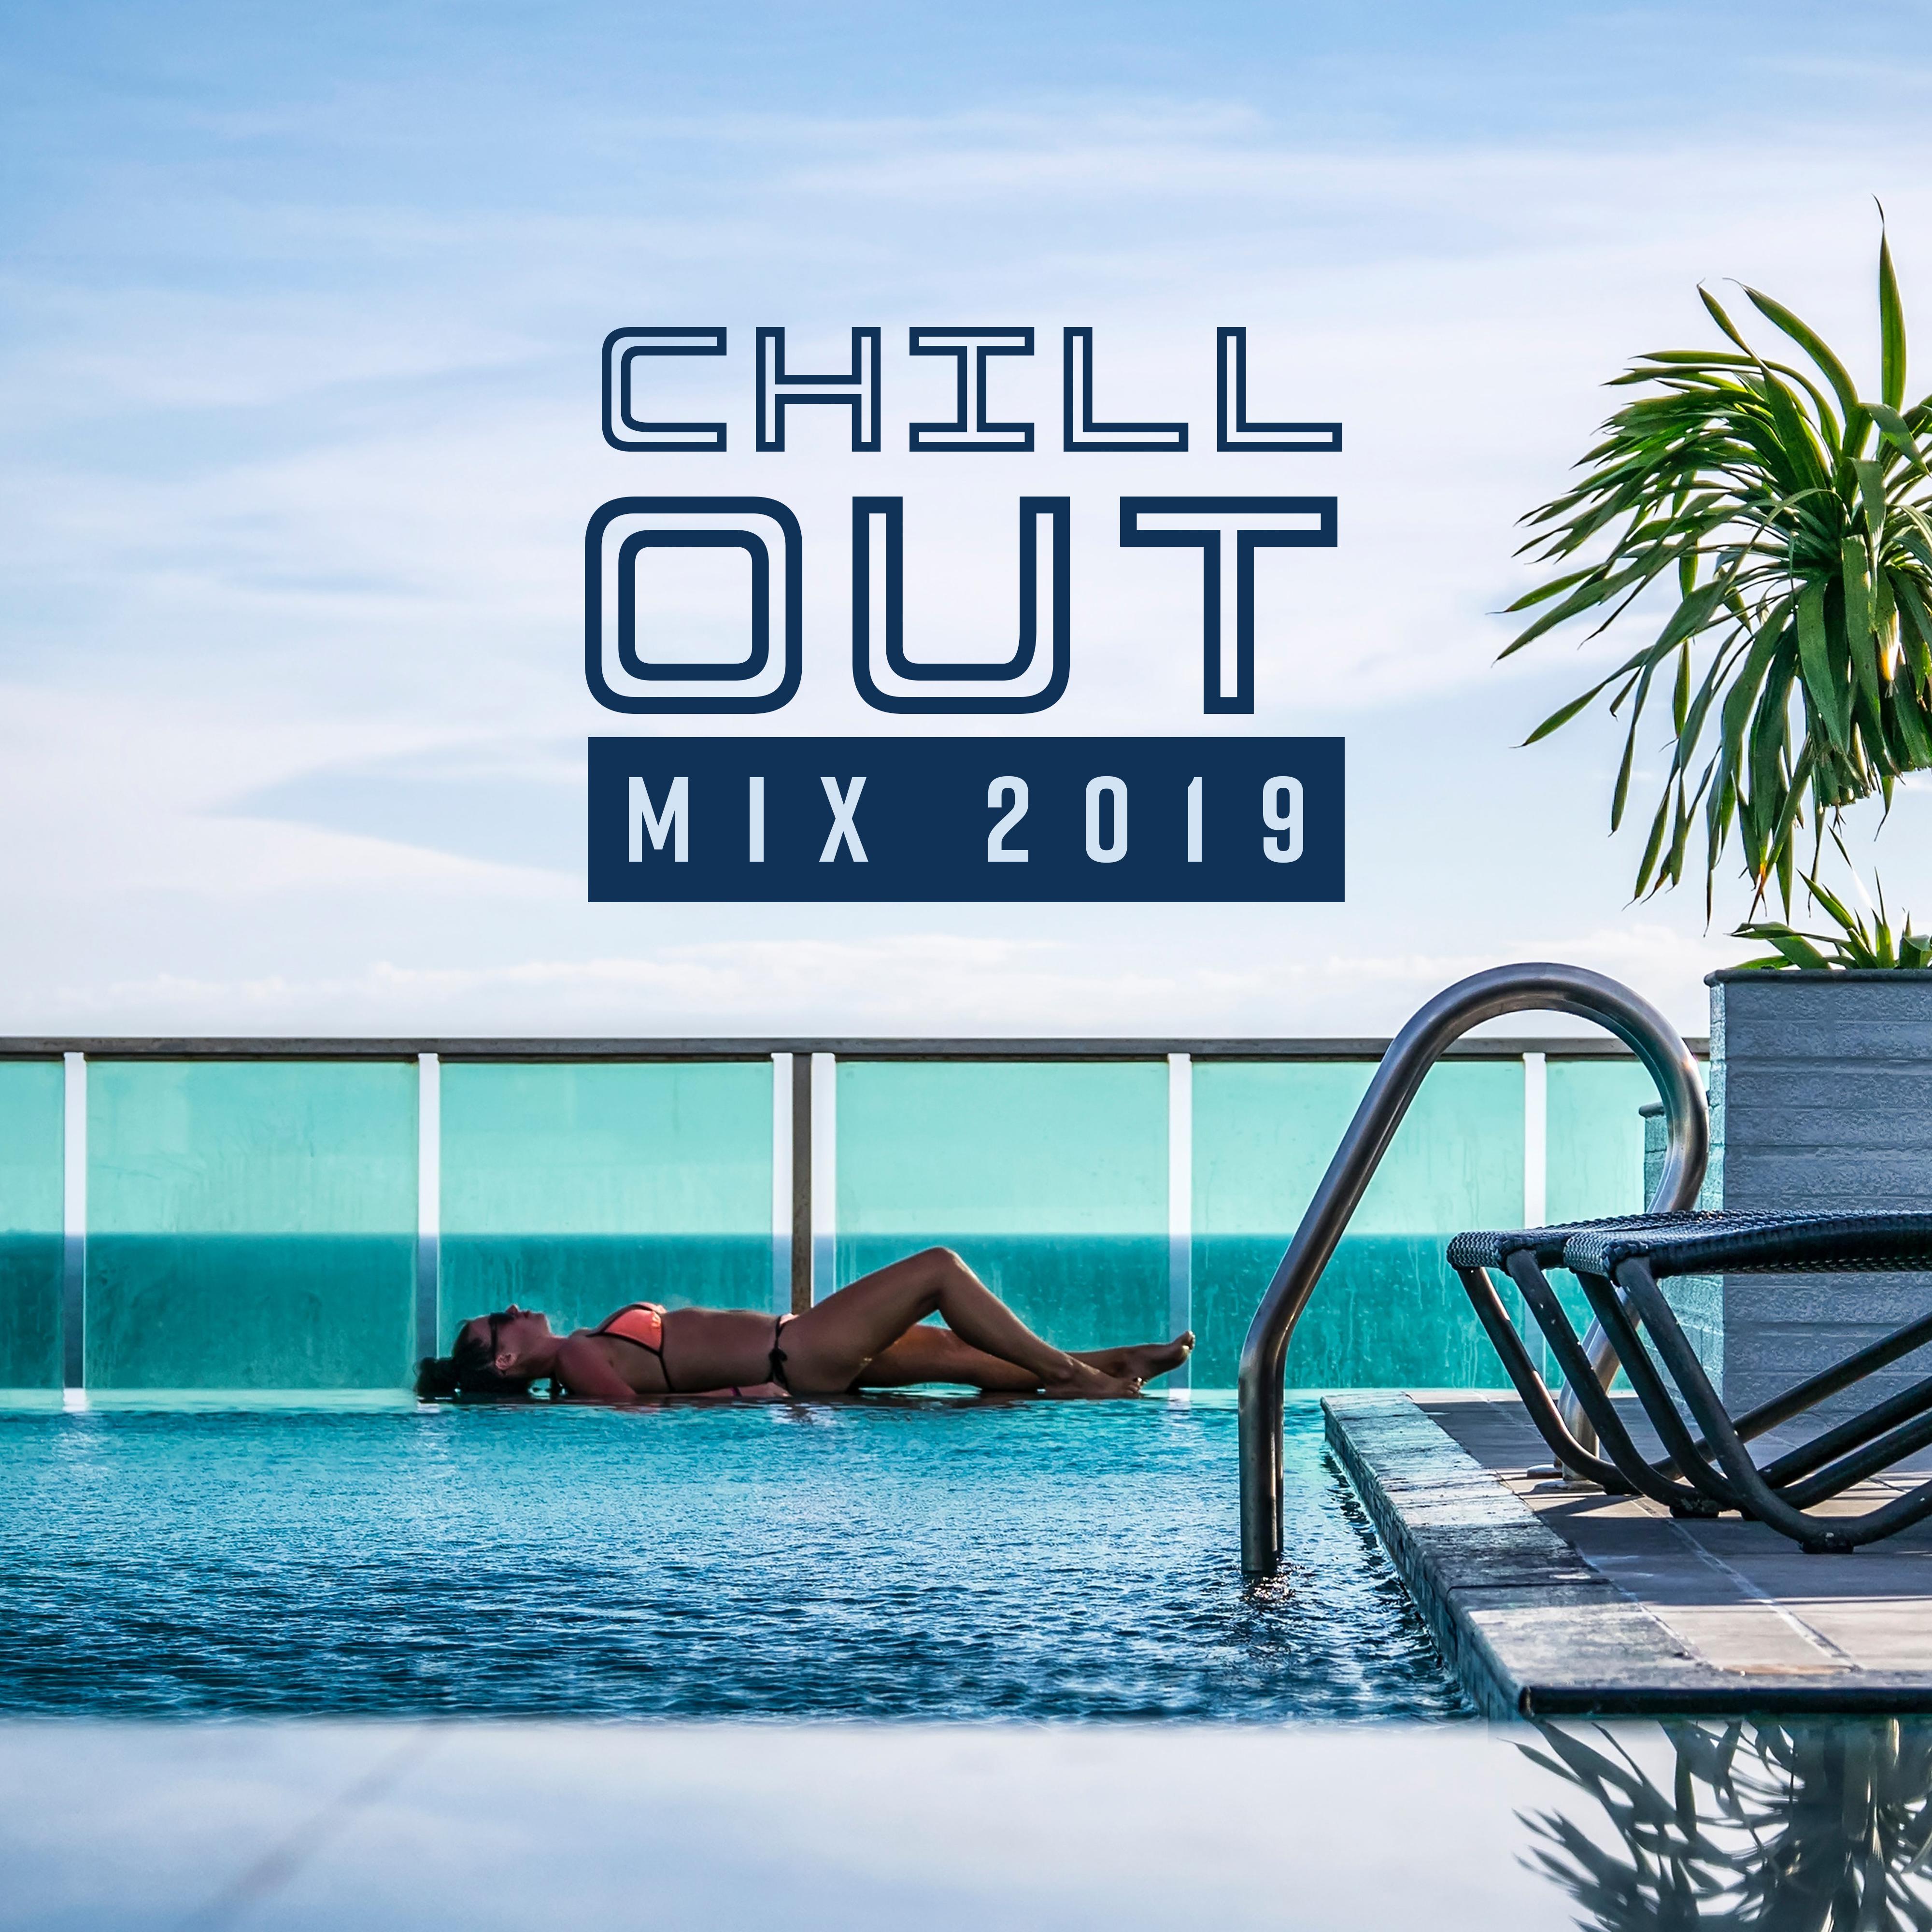 Chillout Mix 2019: Musical Collection of 15 of the Greatest Chillout Beats Created for the Time of Holidays, Rest or Relaxation at Home